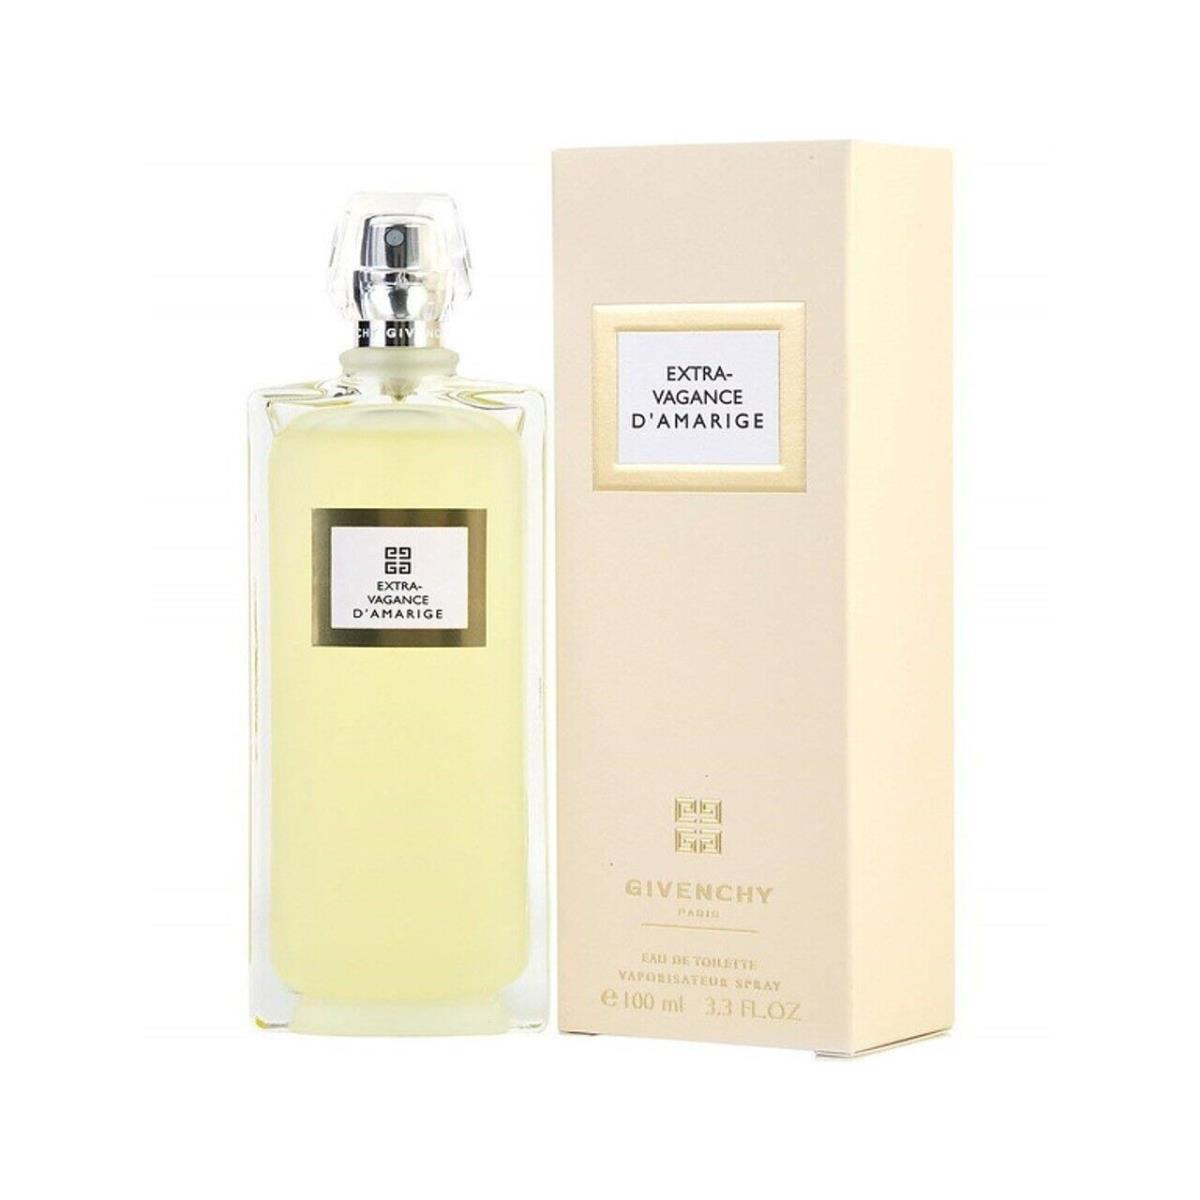 Extra-vagance D`amarige by Givenchy Edt Spray For Women 3.3oz